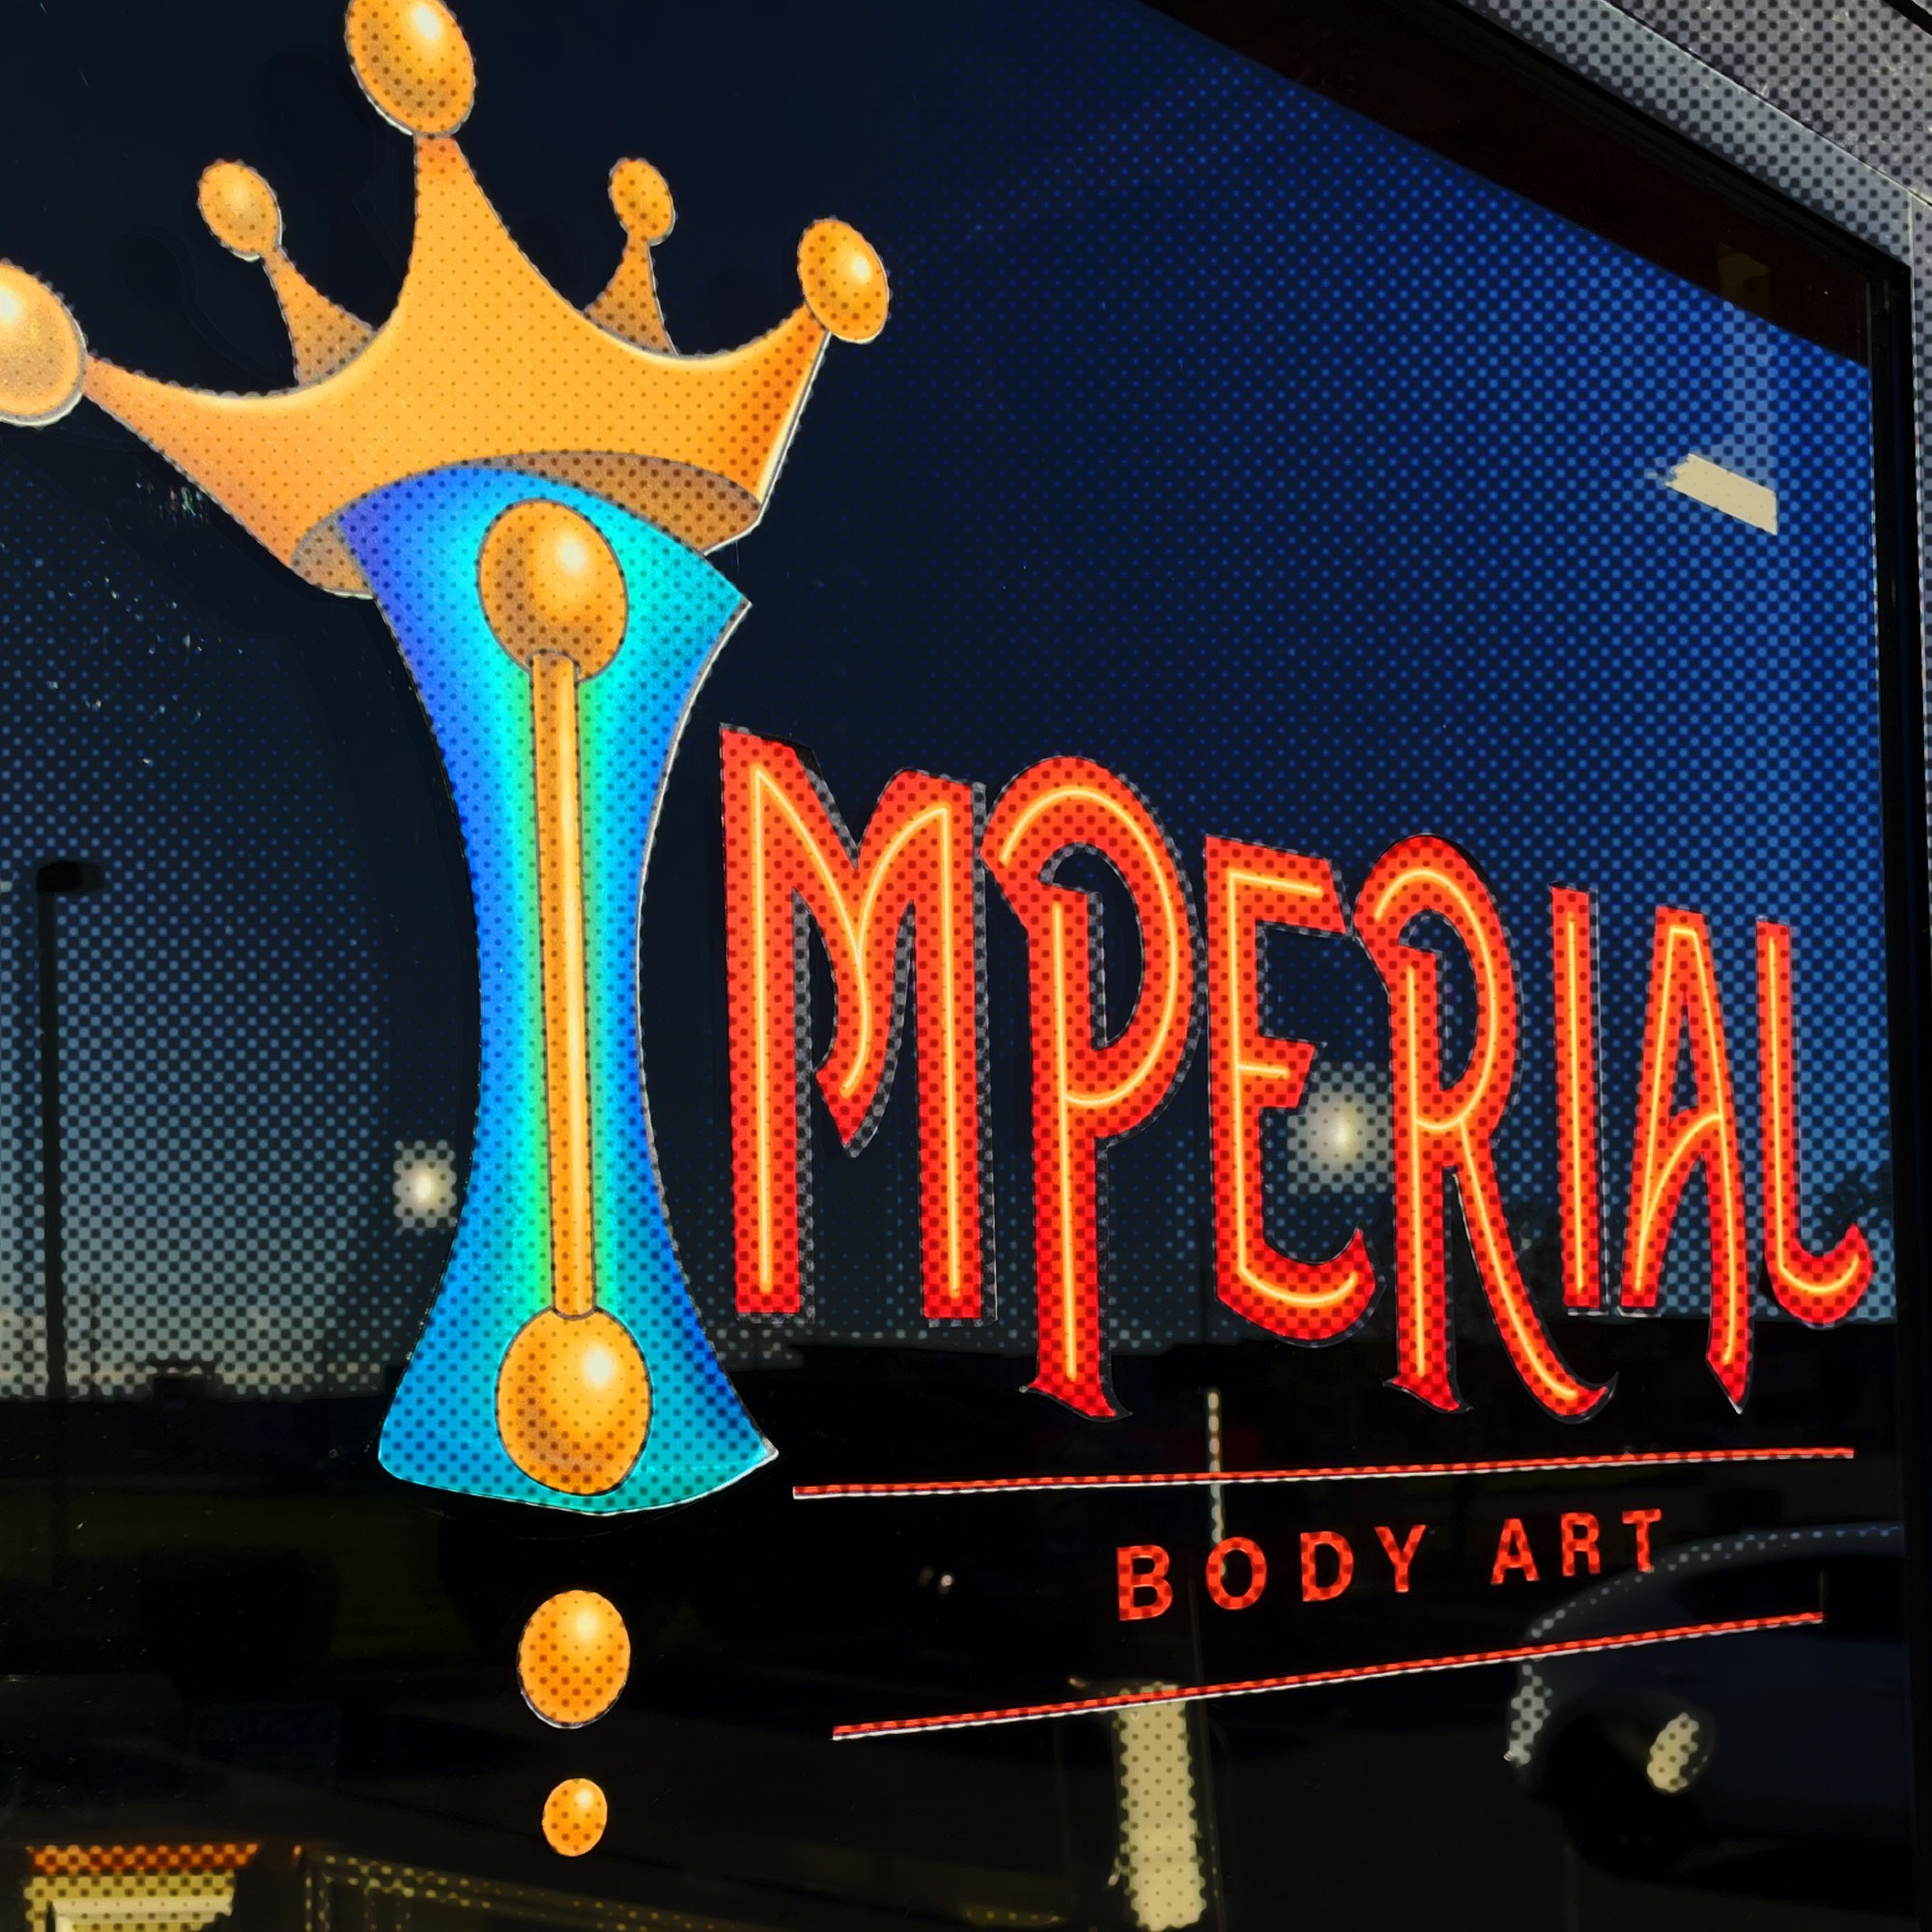 Imperial Body Art logo on the door of the tattoo and piercing shop near Boise, ID